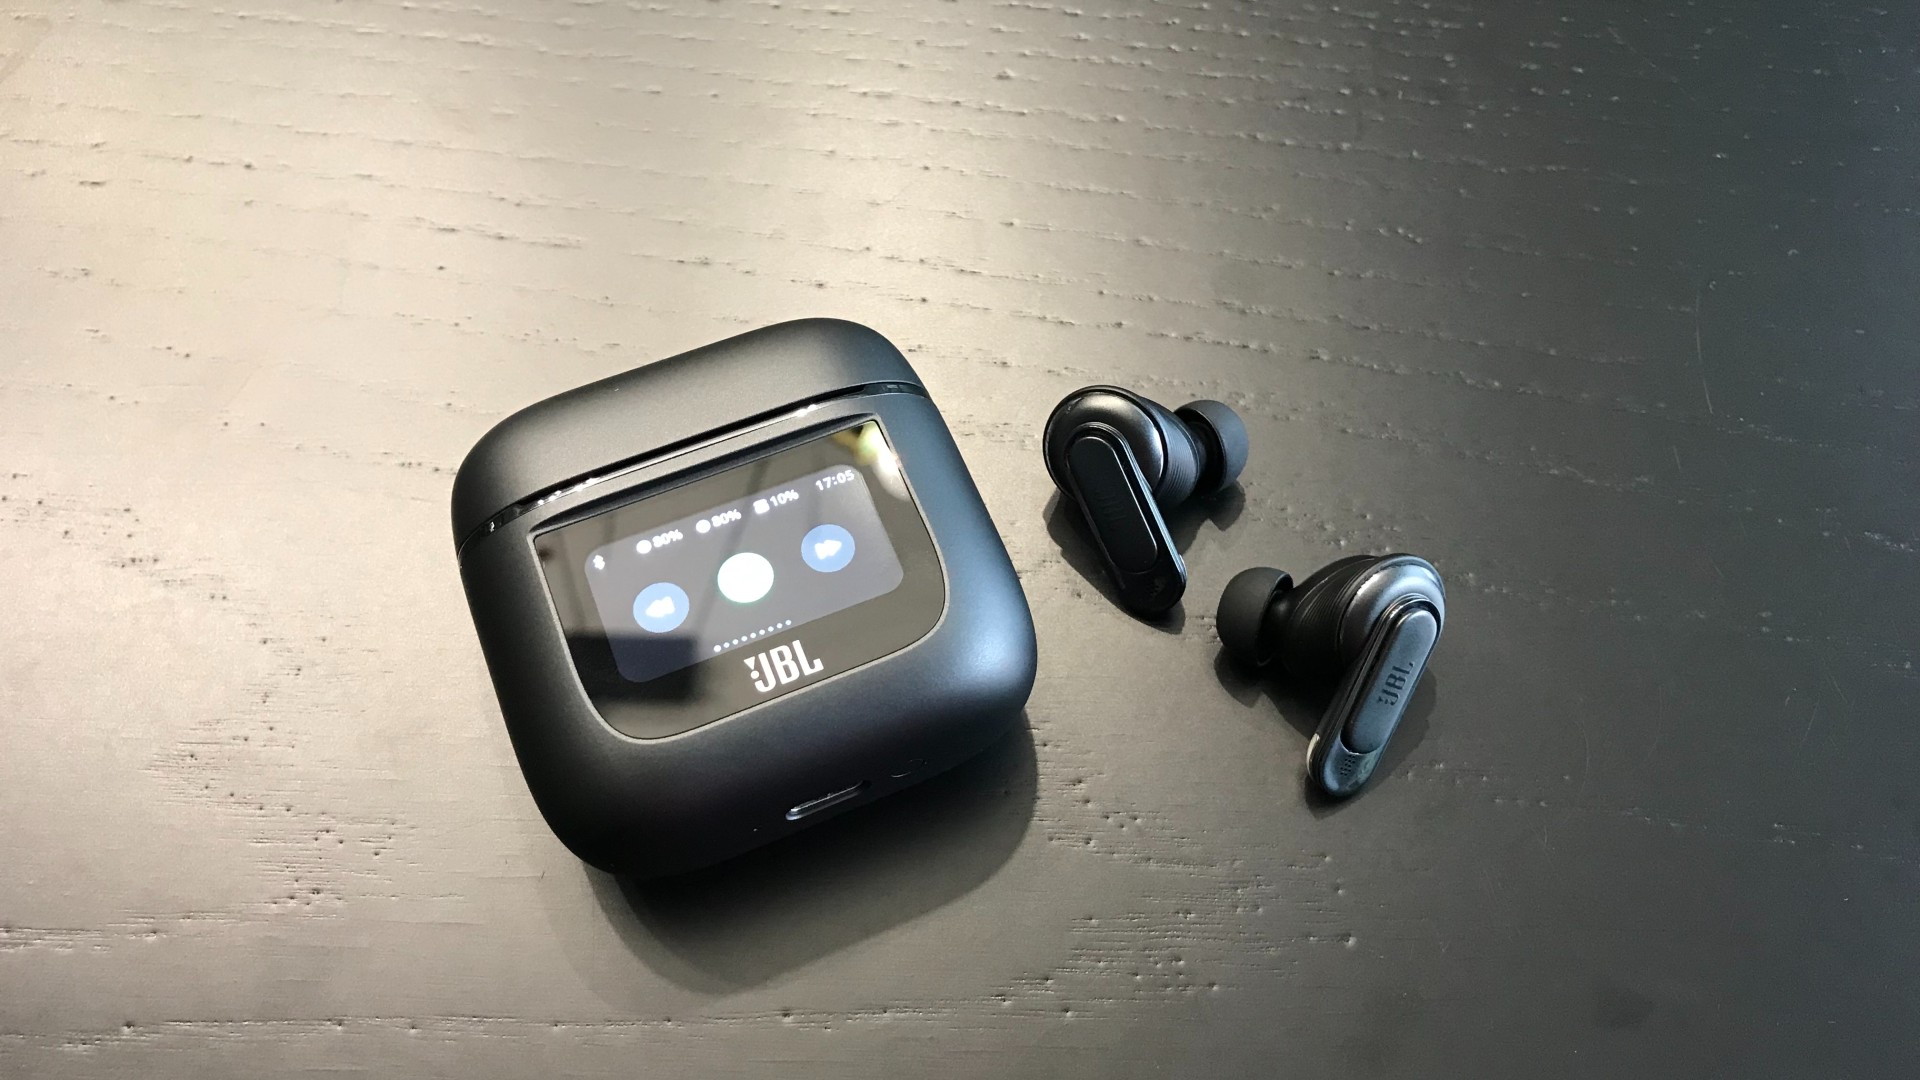 JBL Tour Pro 2 earbuds and case showing ANC profiles